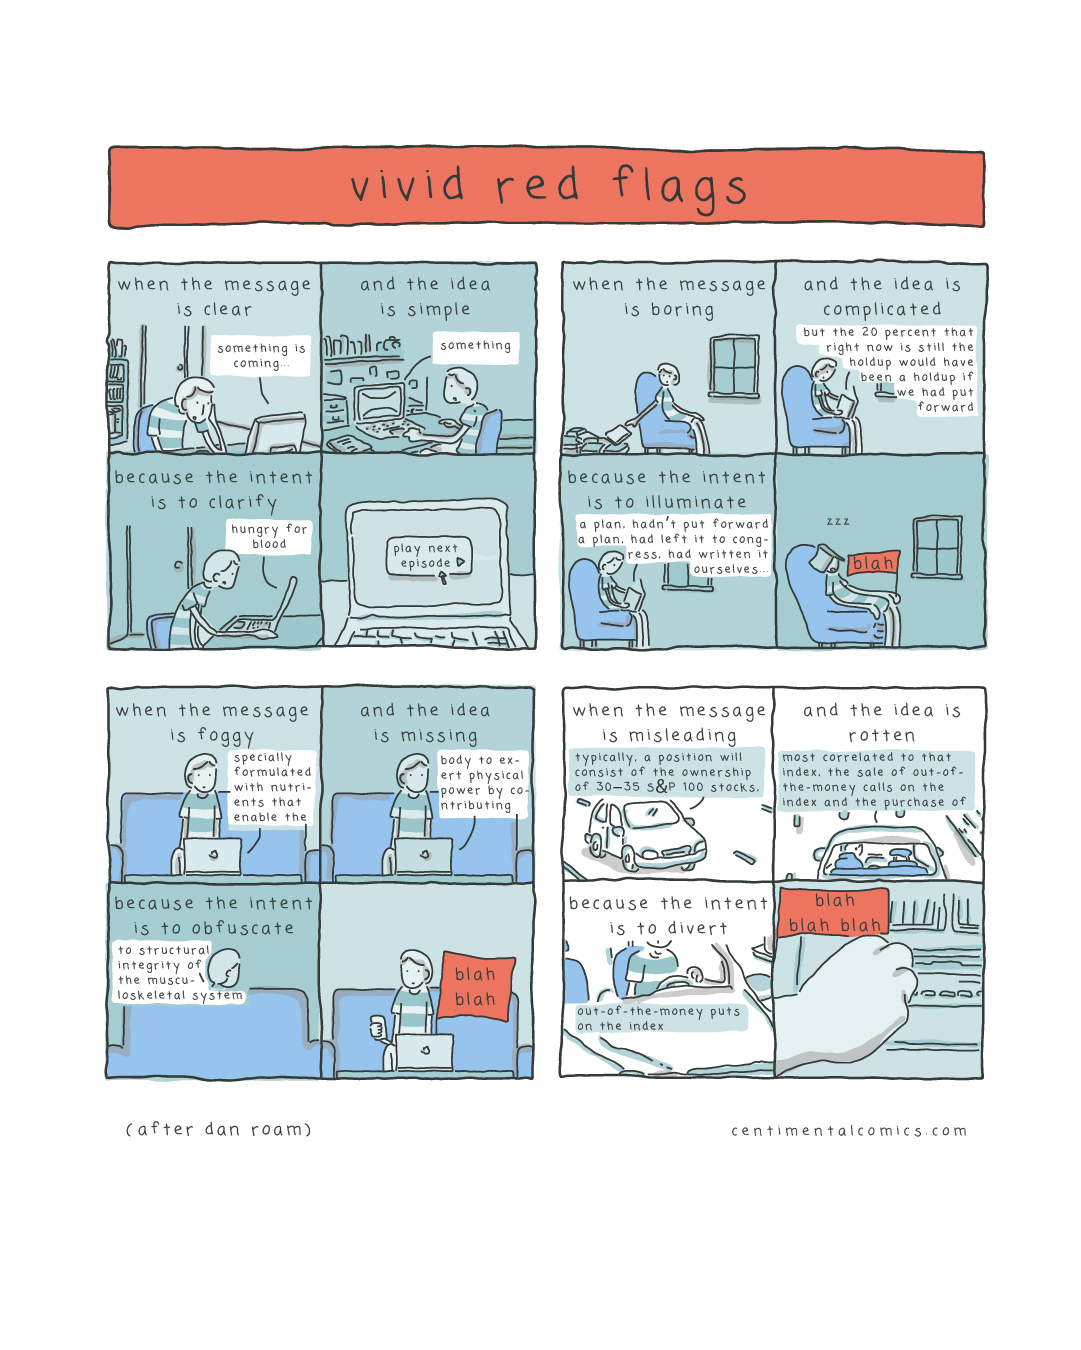 vivid red flags